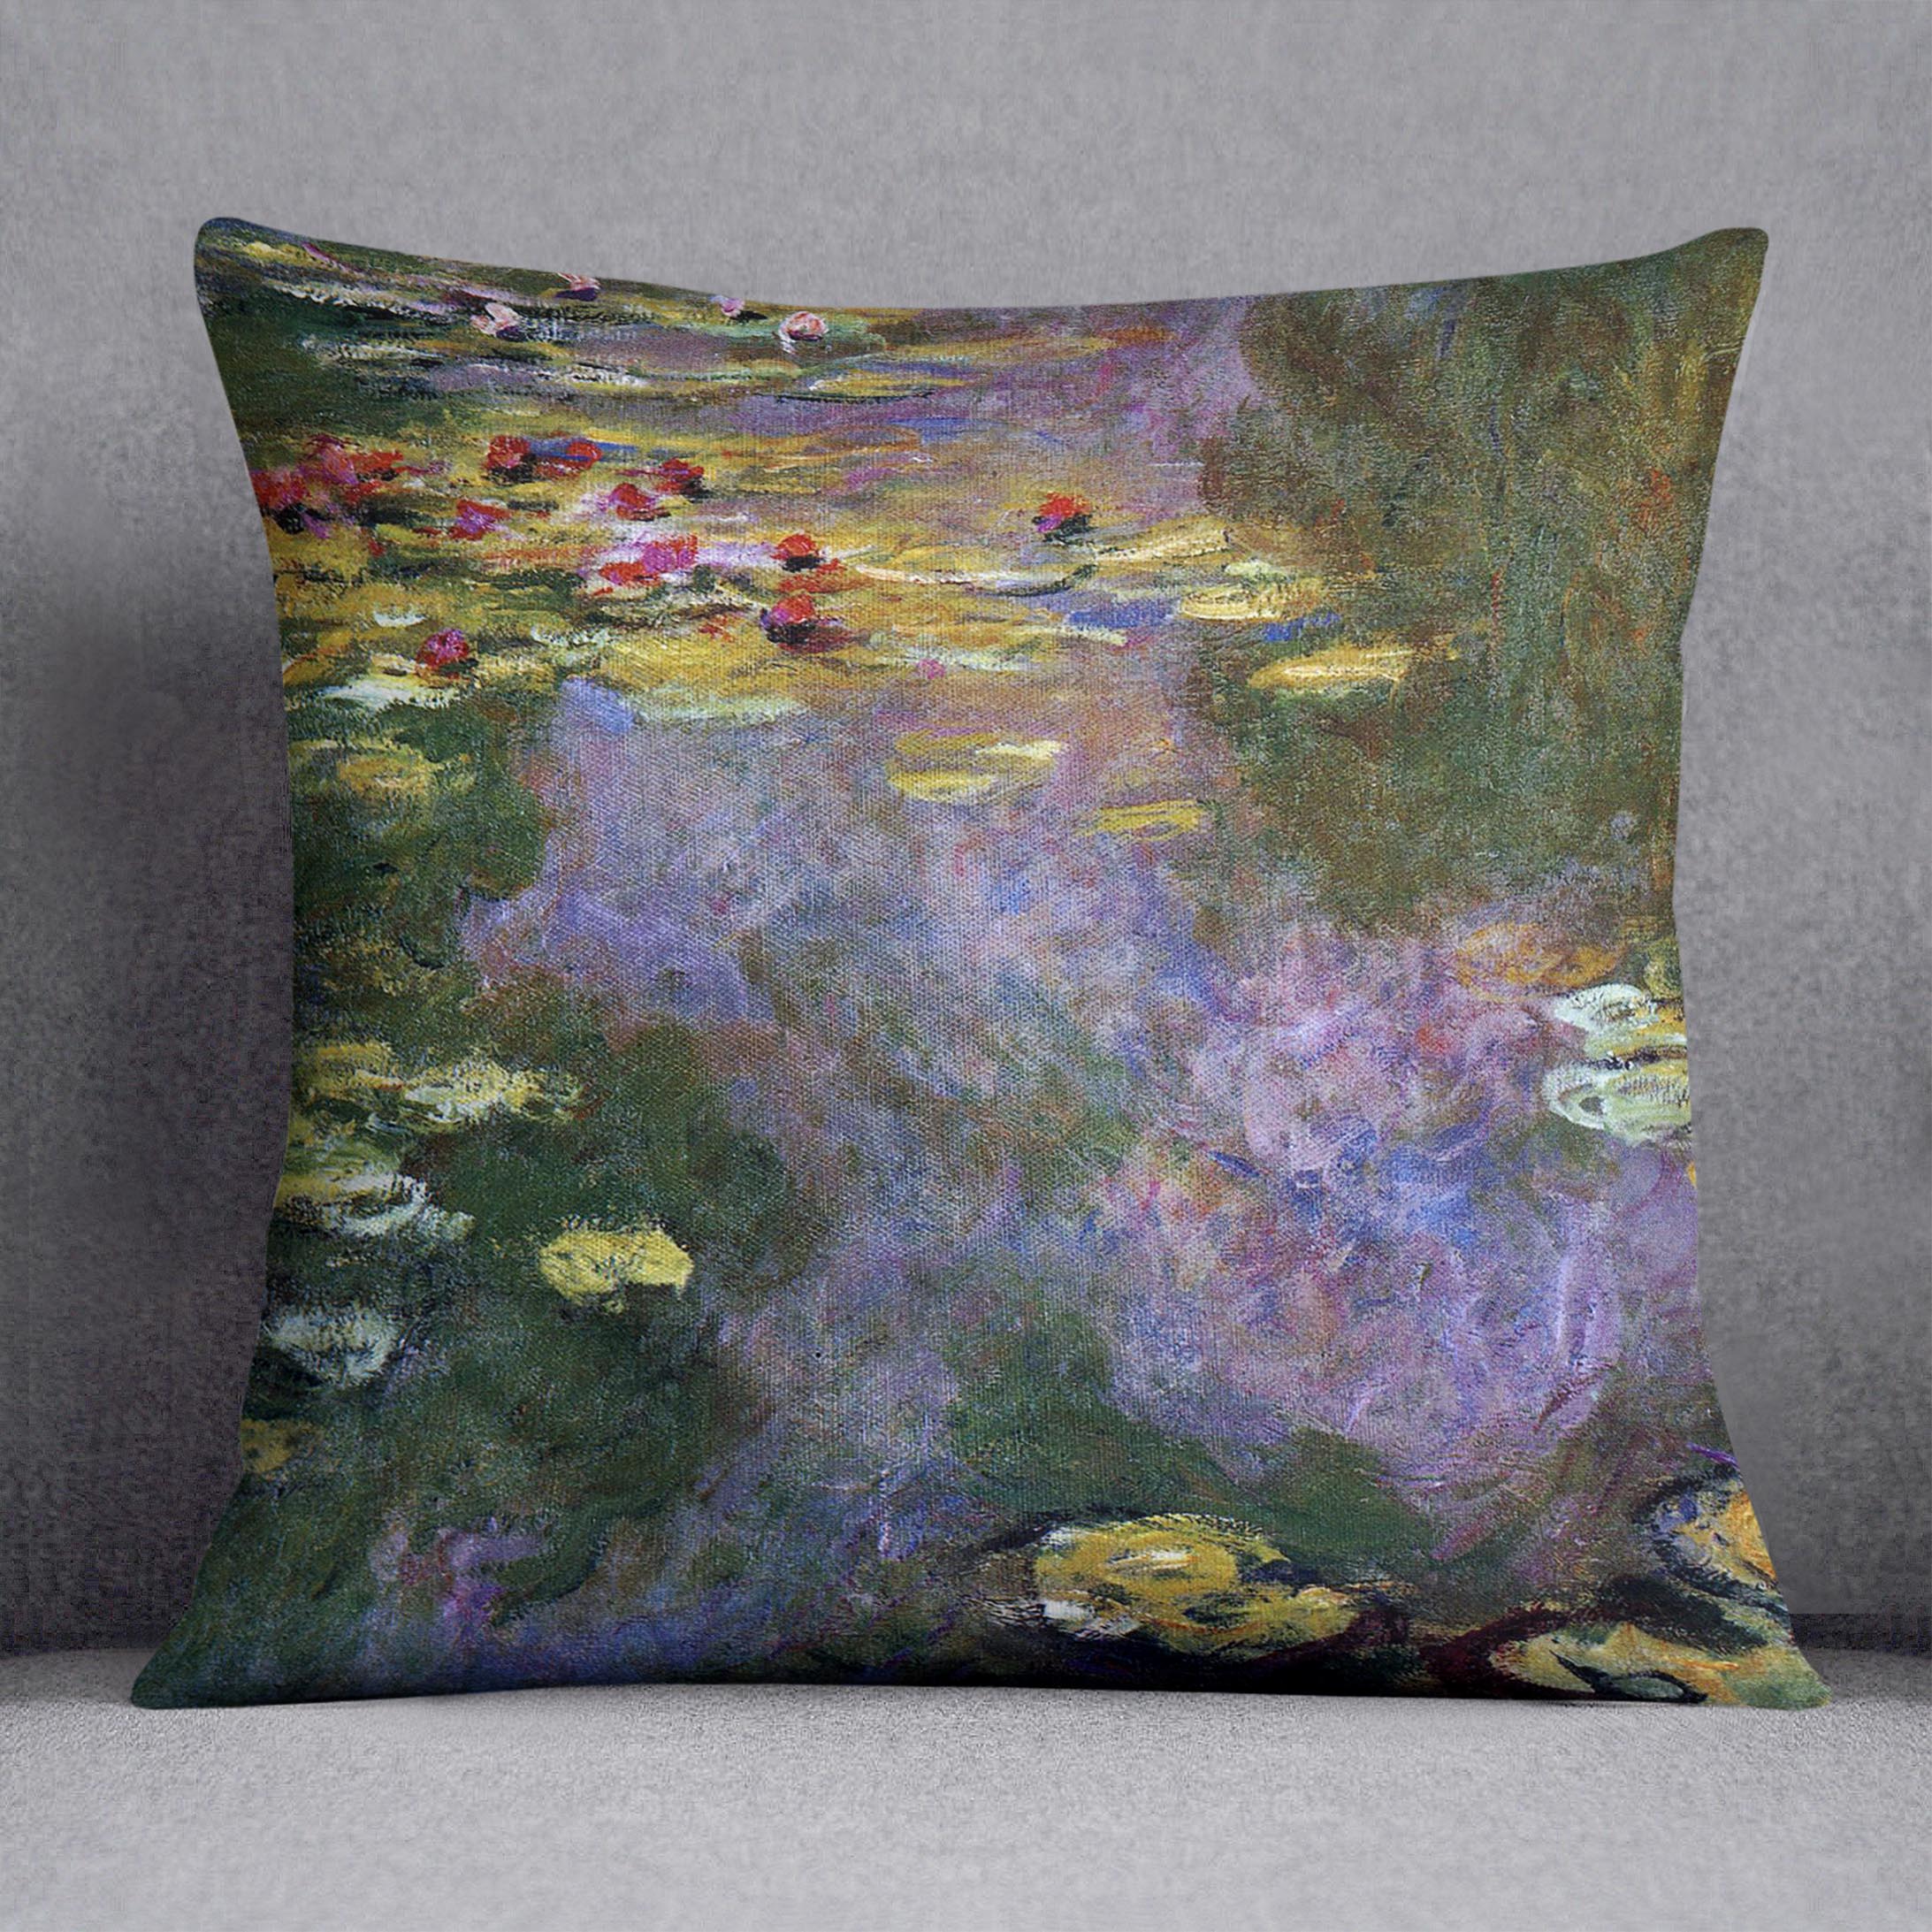 Water Lily Pond Giverny by Monet Cushion